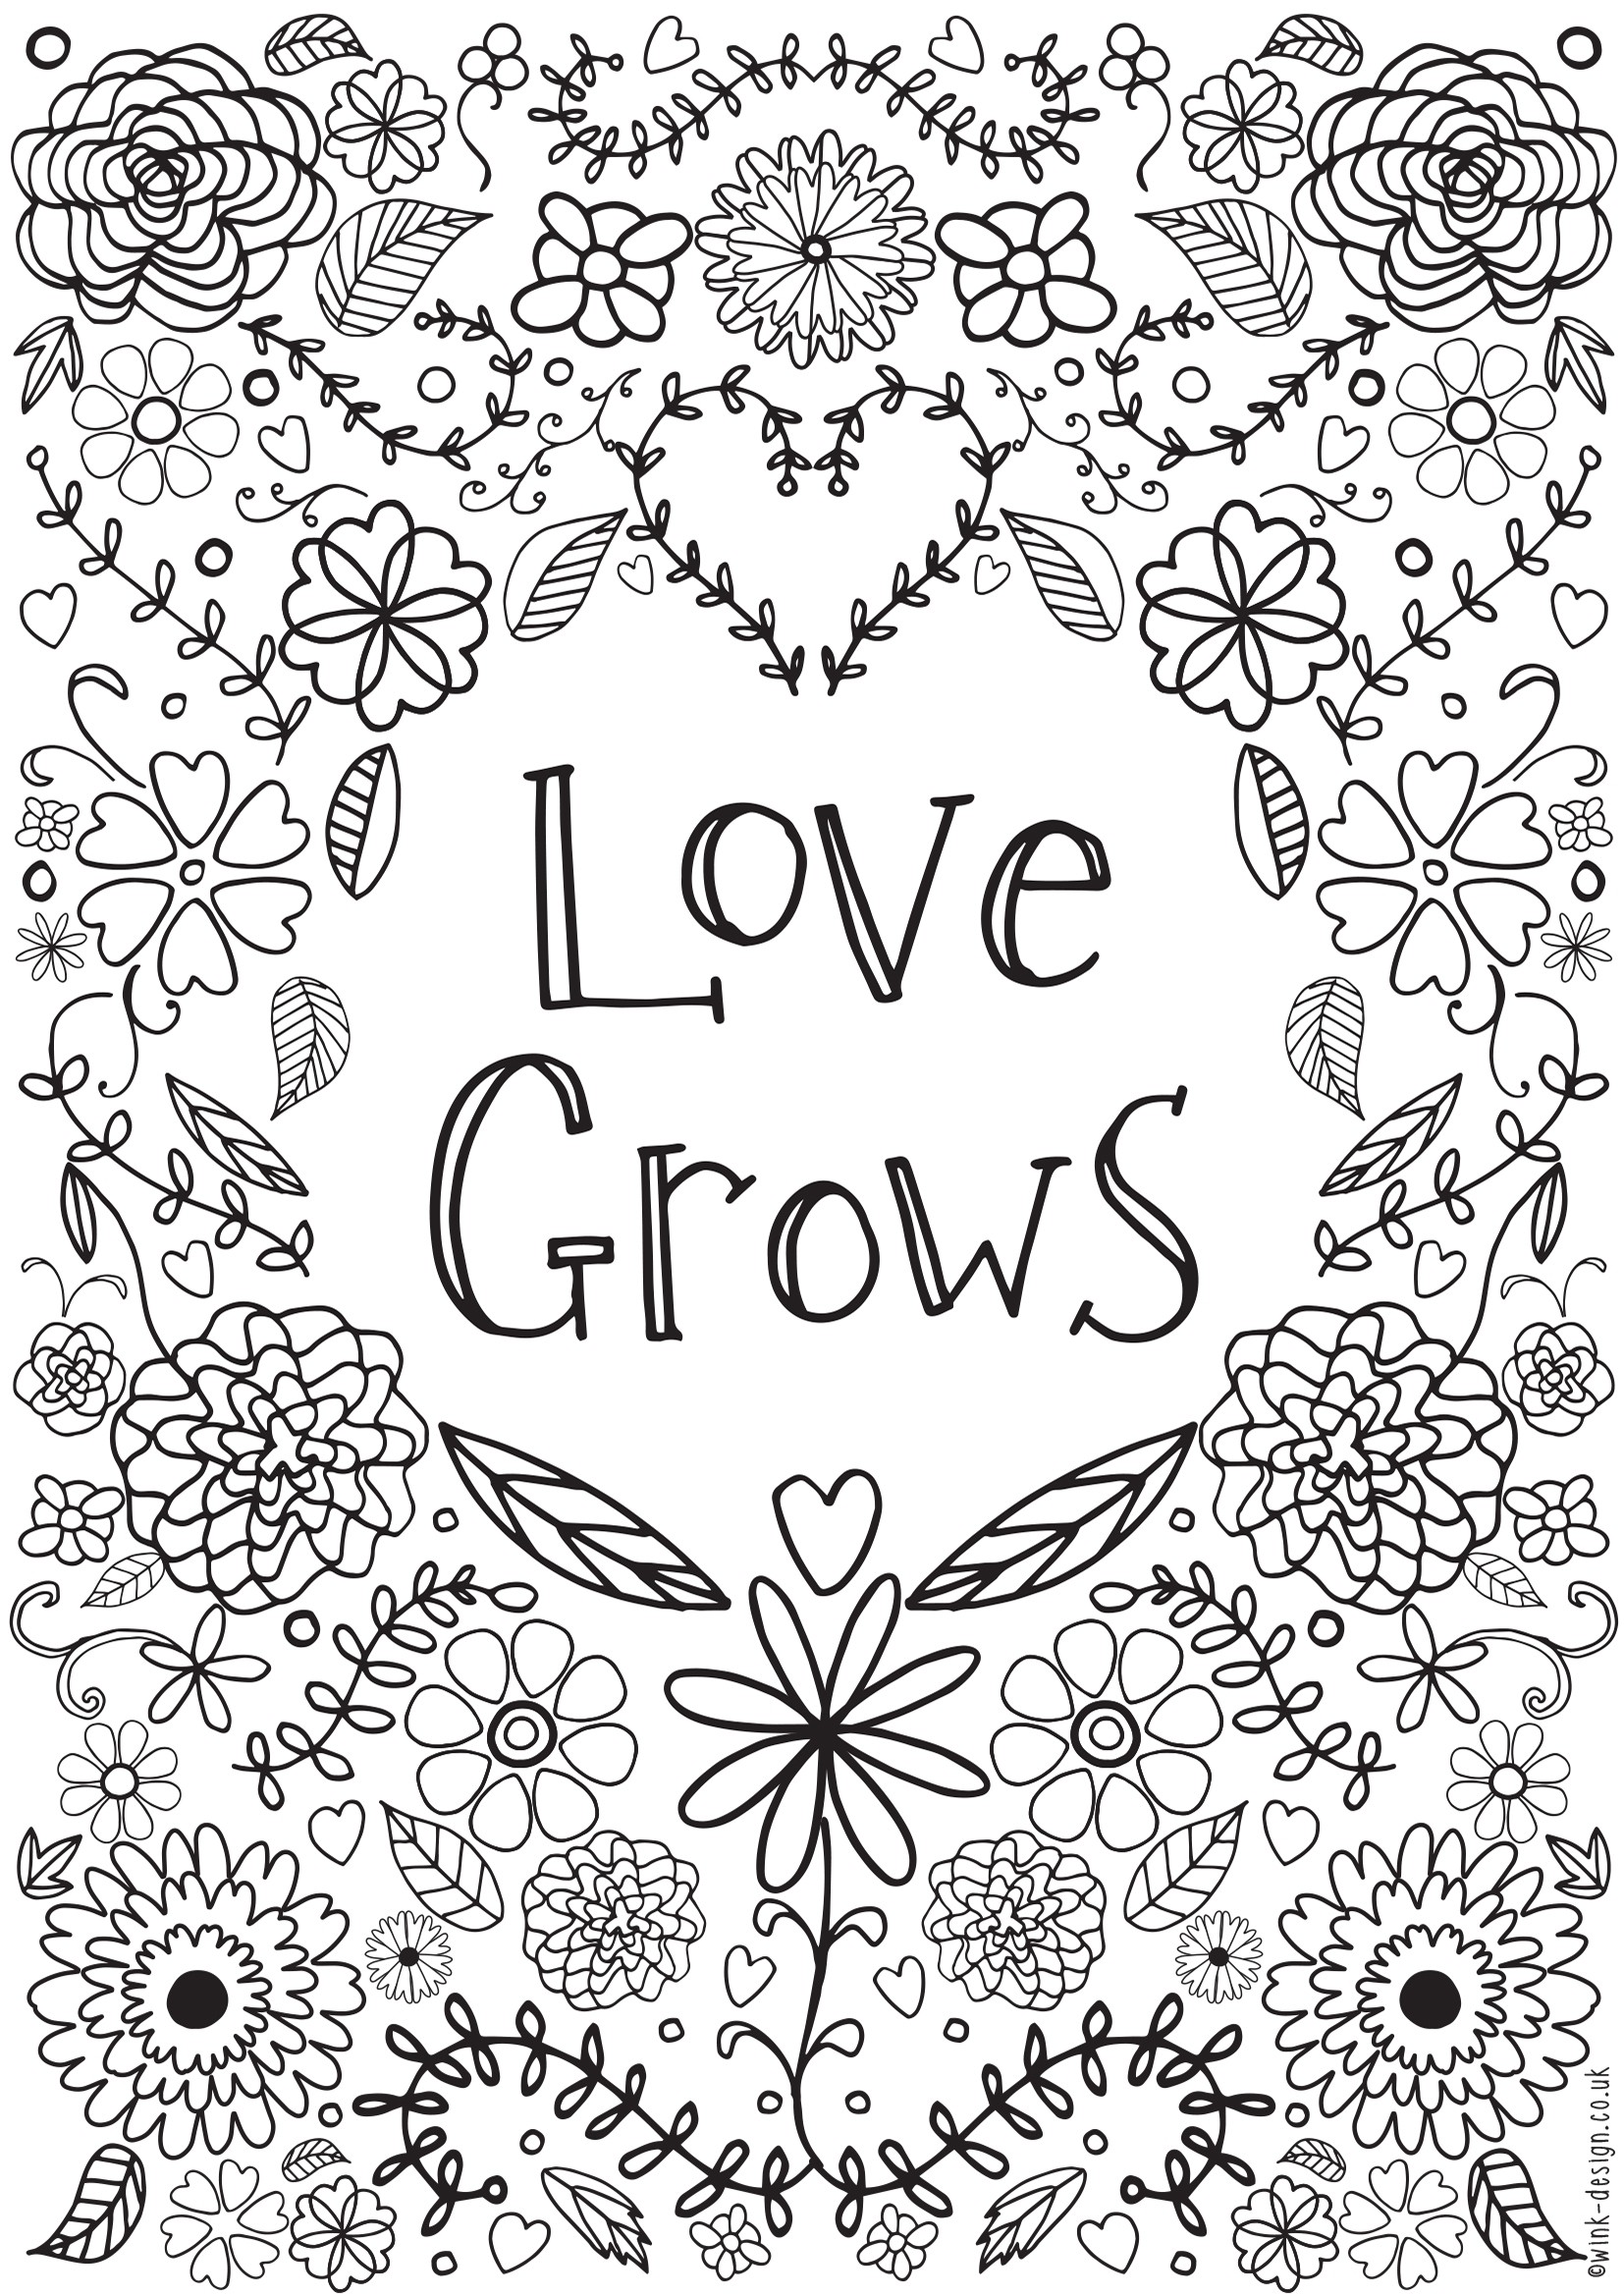 lds quote coloring pages